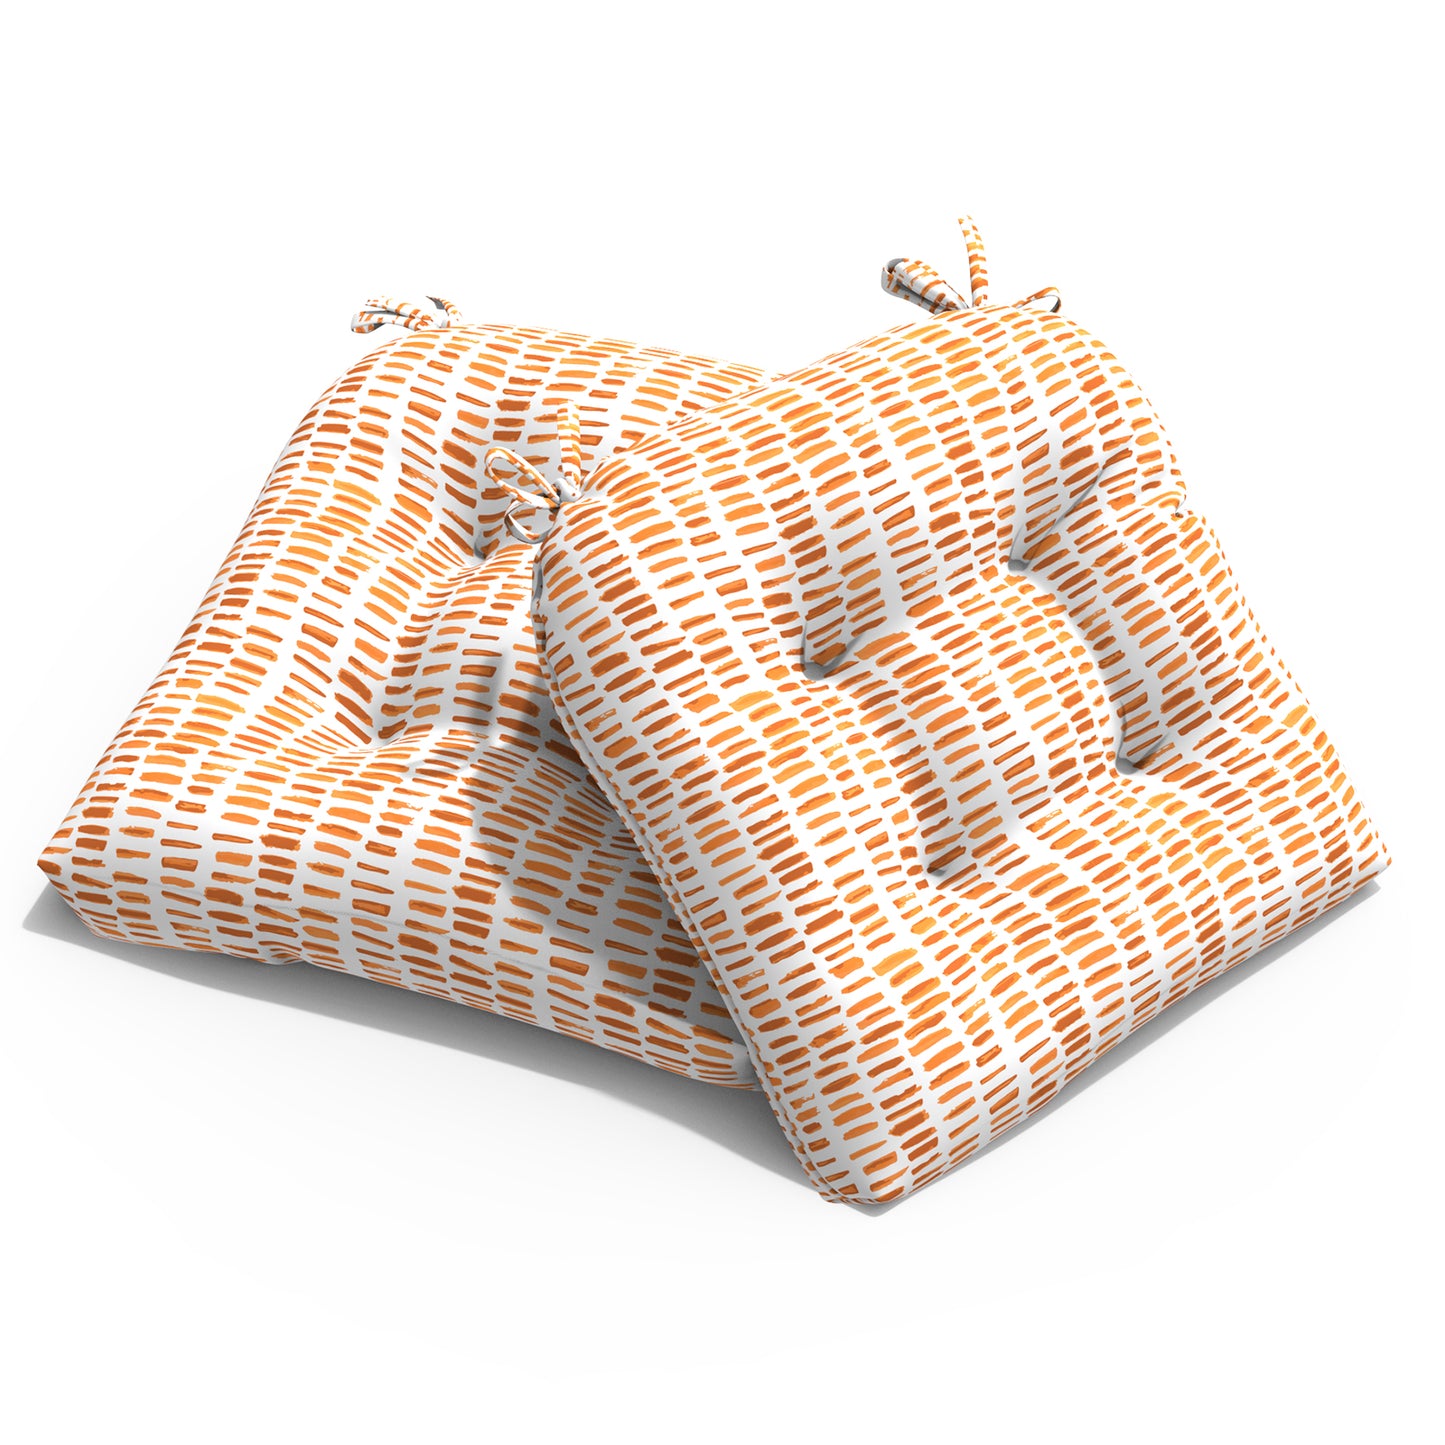 Melody Elephant Patio Wicker Chair Cushions, All Weather Outdoor Tufted Chair Pads Pack of 2, 19 x 19 x 5 Inch U-Shaped Seat Cushions of Garden Furniture Decoration, Pebble Orange